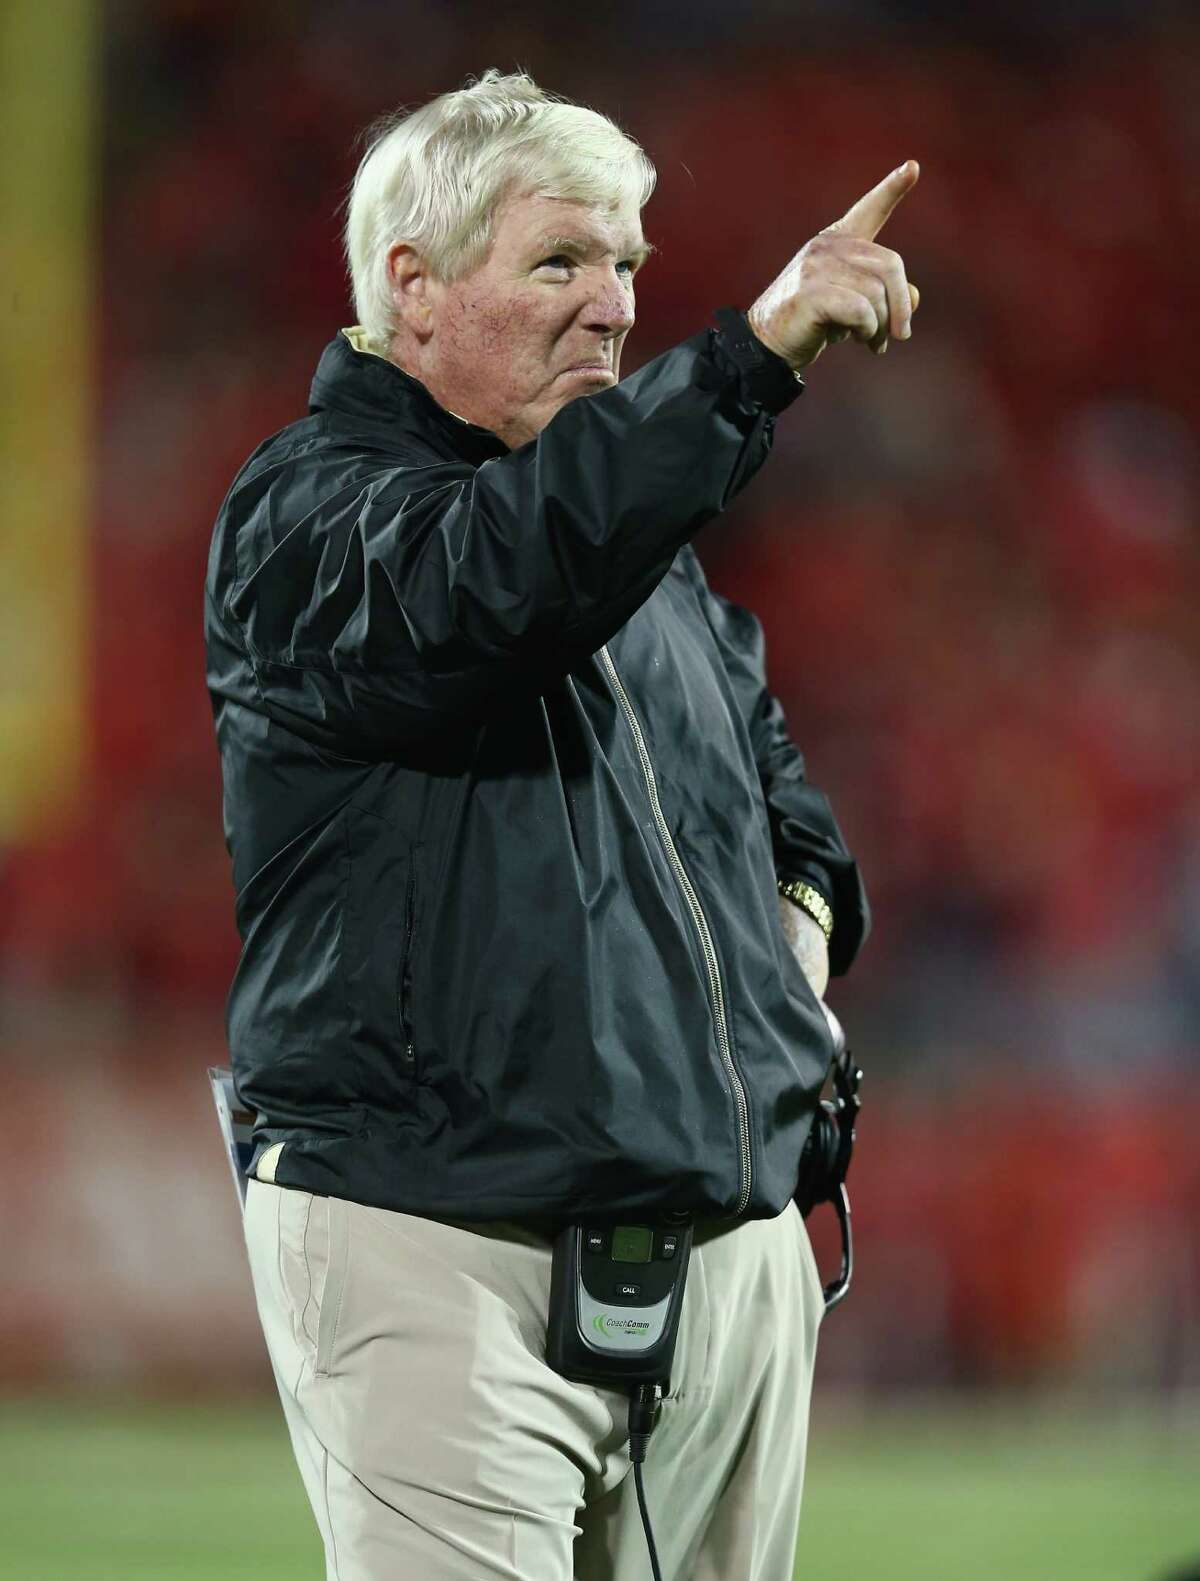 LOUISVILLE, KY - OCTOBER 18: George O'Leary the head coach of the Central Florida Knights gives instructions to his team during the game against the Louisville Cardinals at Papa John's Cardinal Stadium on October 18, 2013 in Louisville, Kentucky.